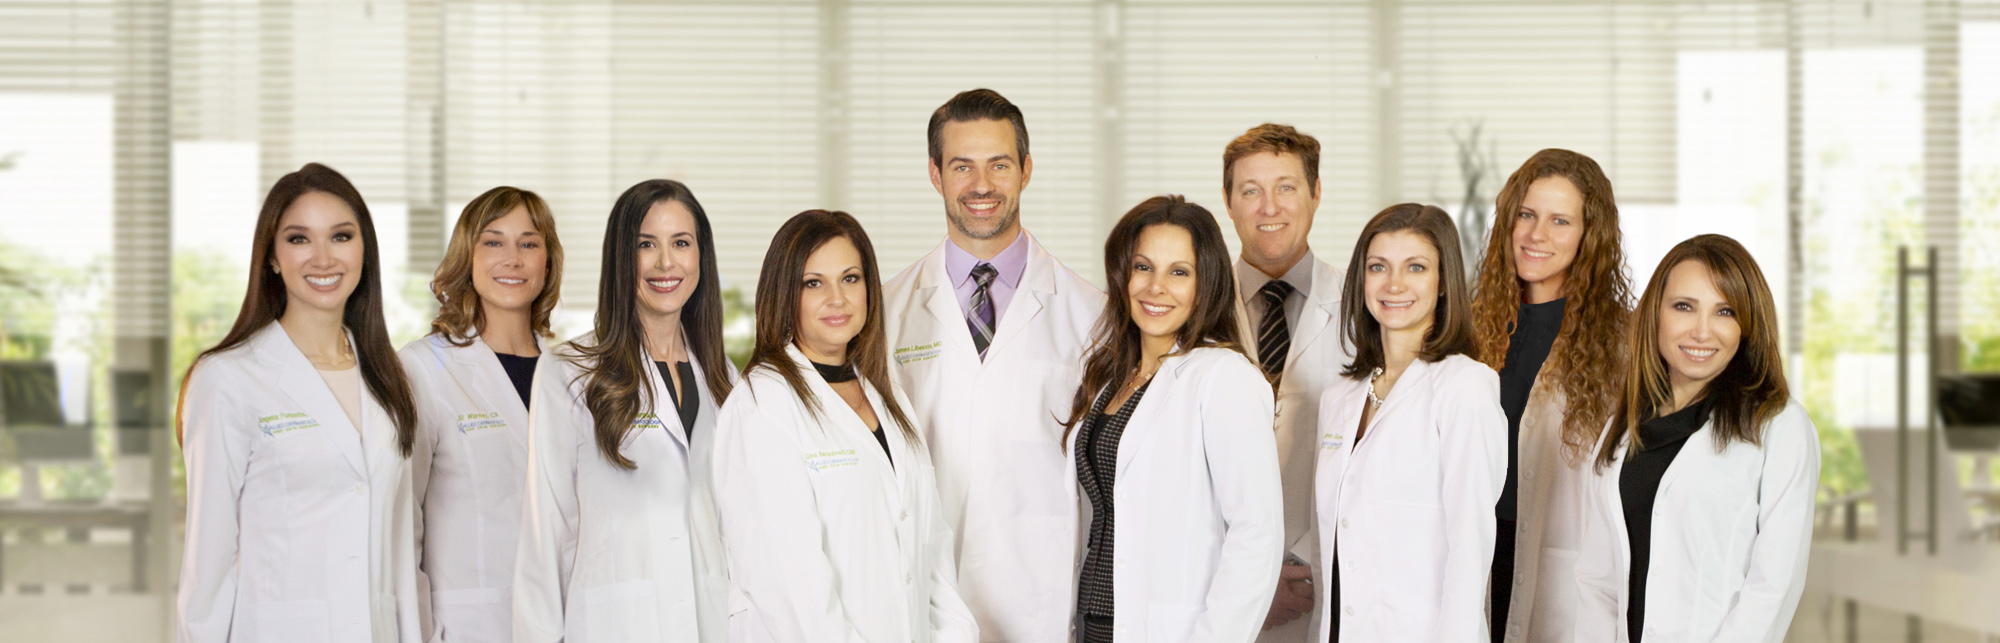 Group photo of Allied Derm doctors